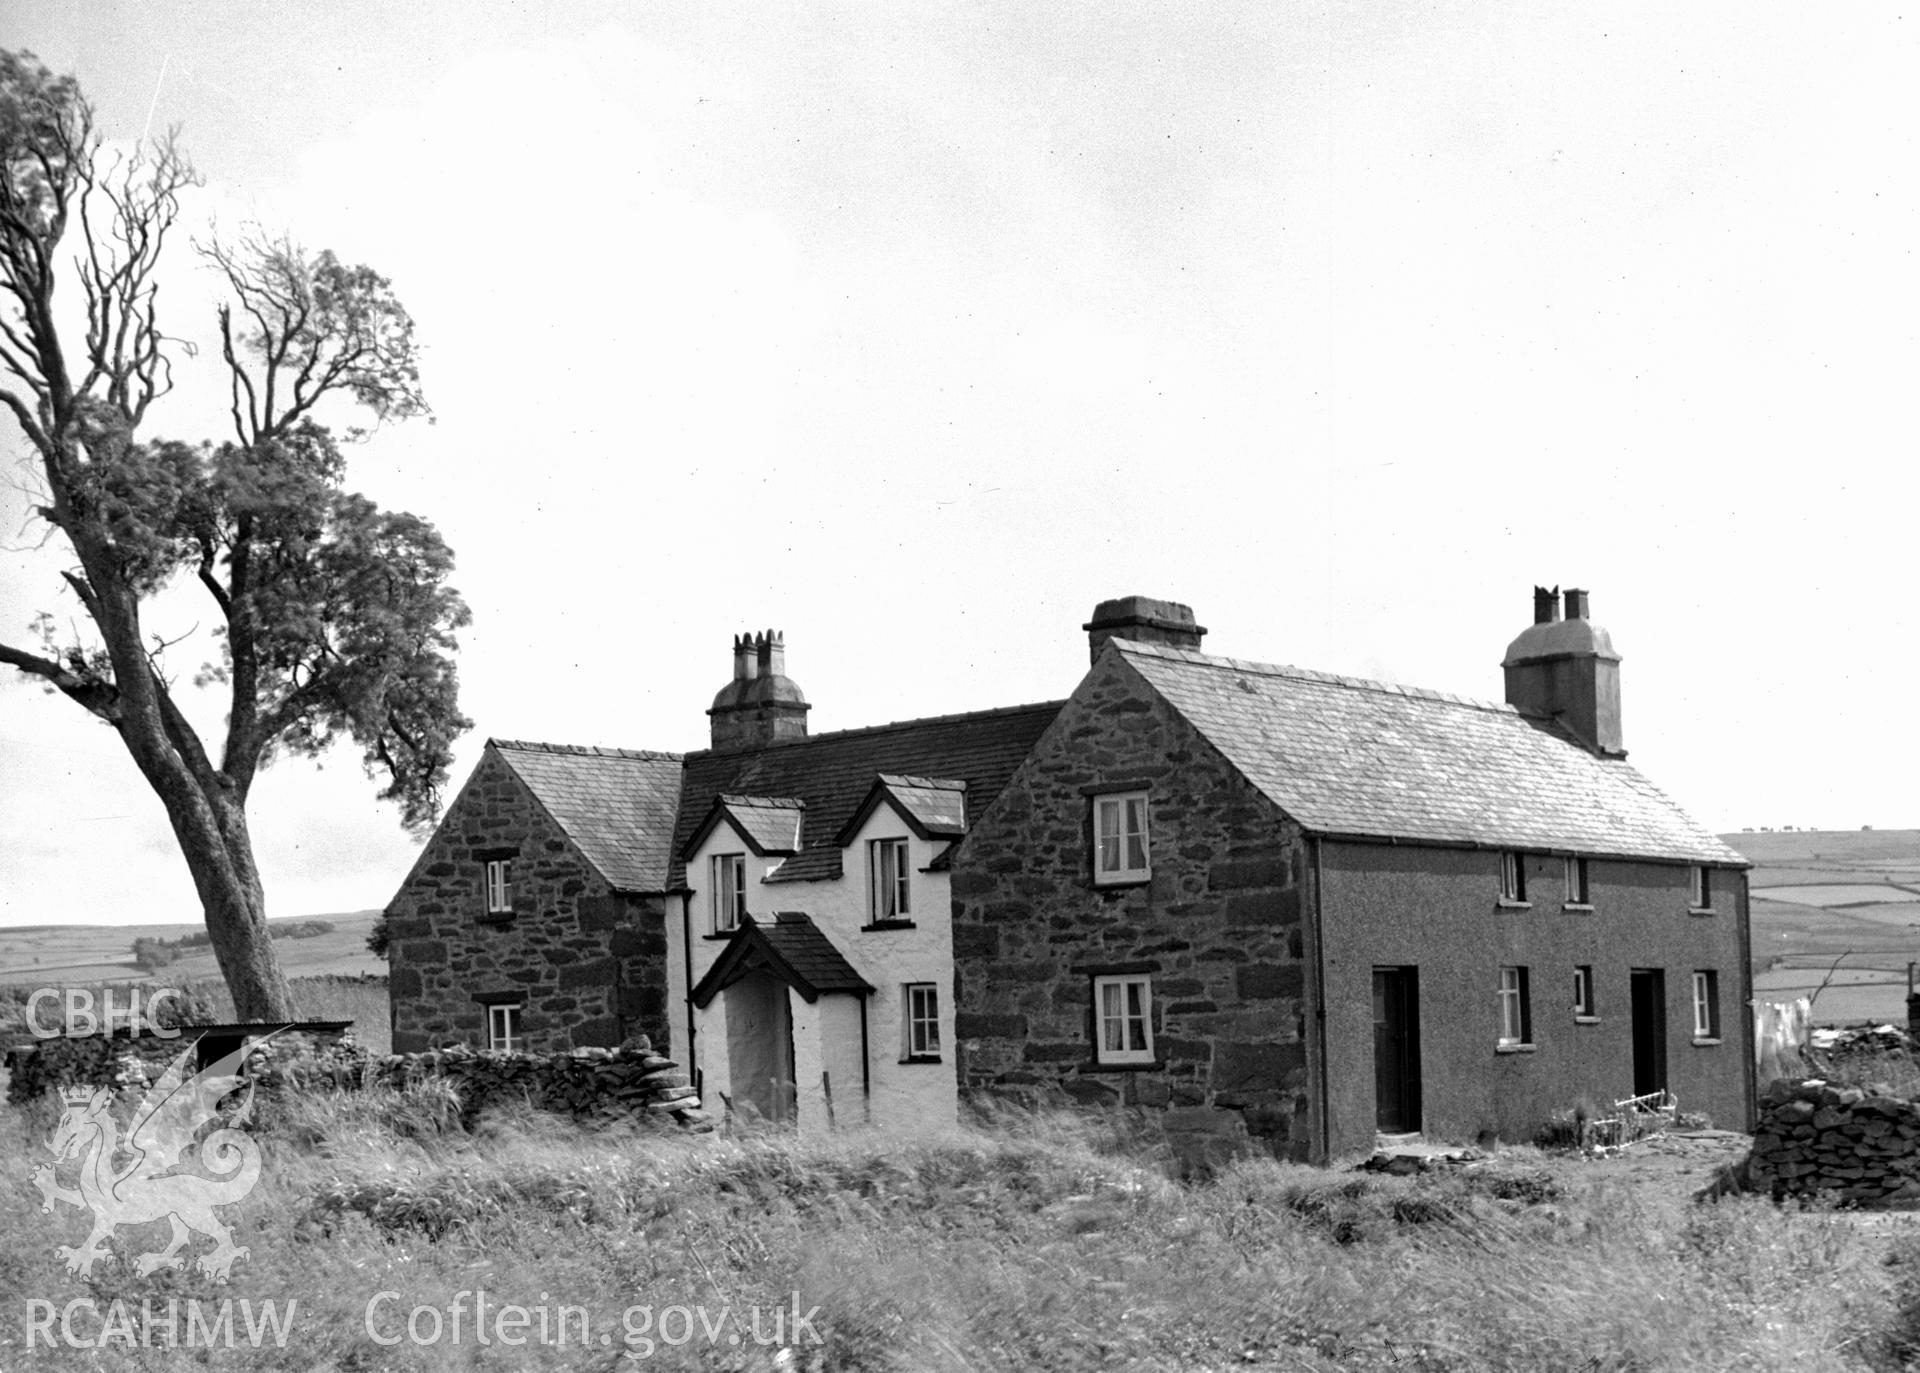 Black and white photographic survey of Llynn-onn Cottages, Pentrefoelas, produced by George Bernard Mason as part of the National Buildings Record